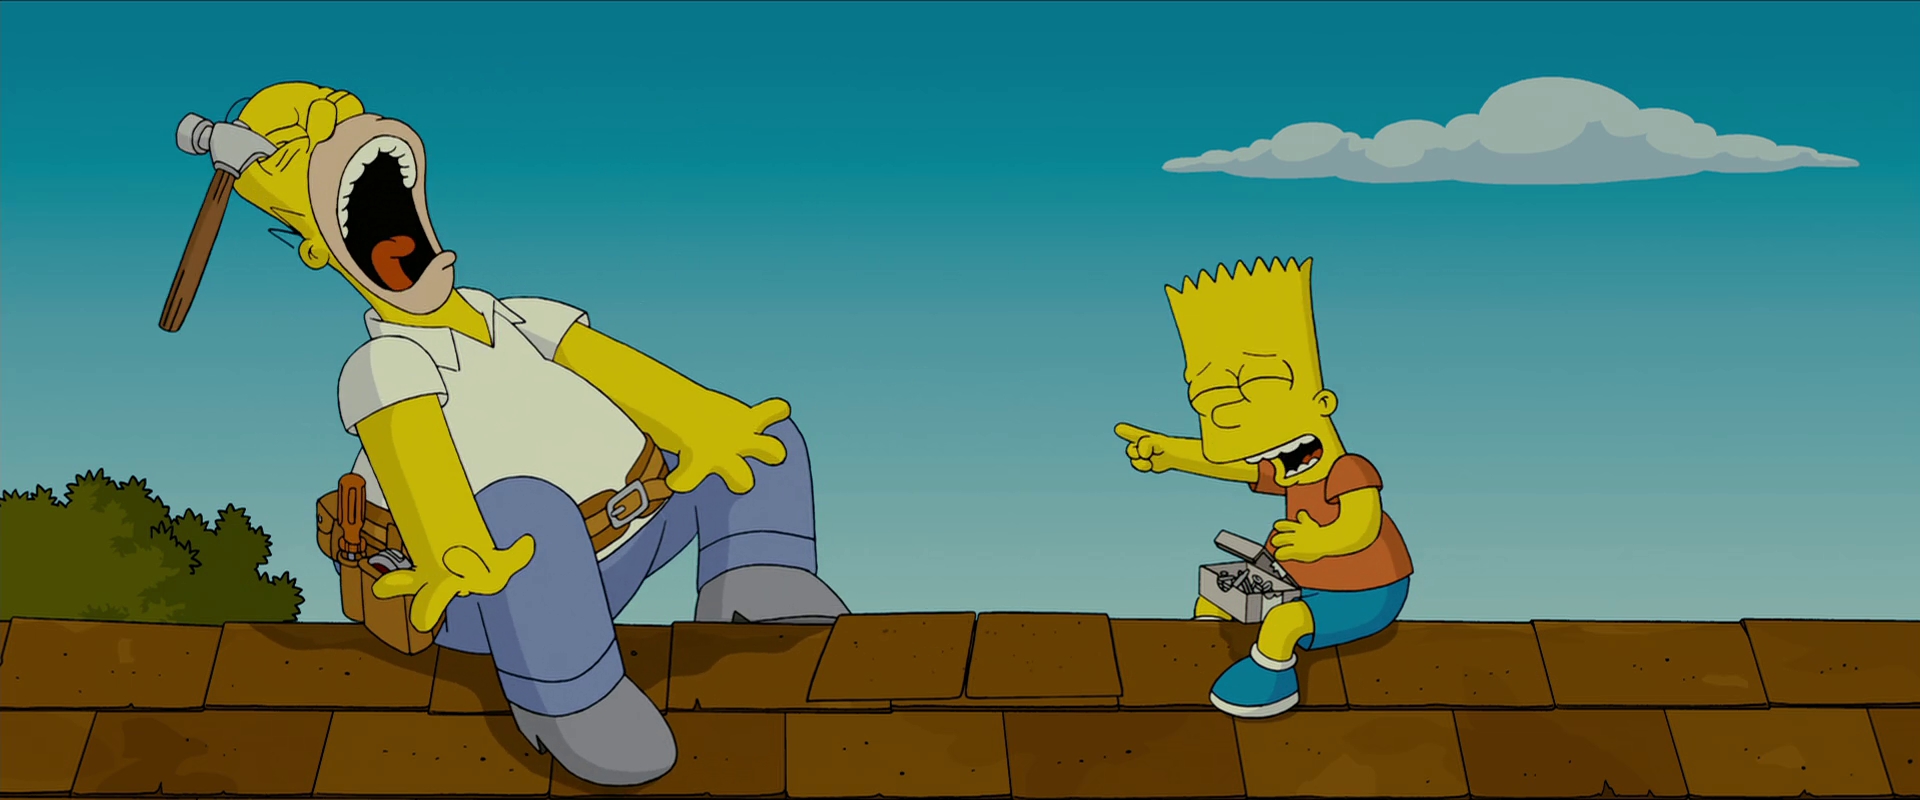 High Resolution Wallpaper | The Simpsons Movie 1920x800 px